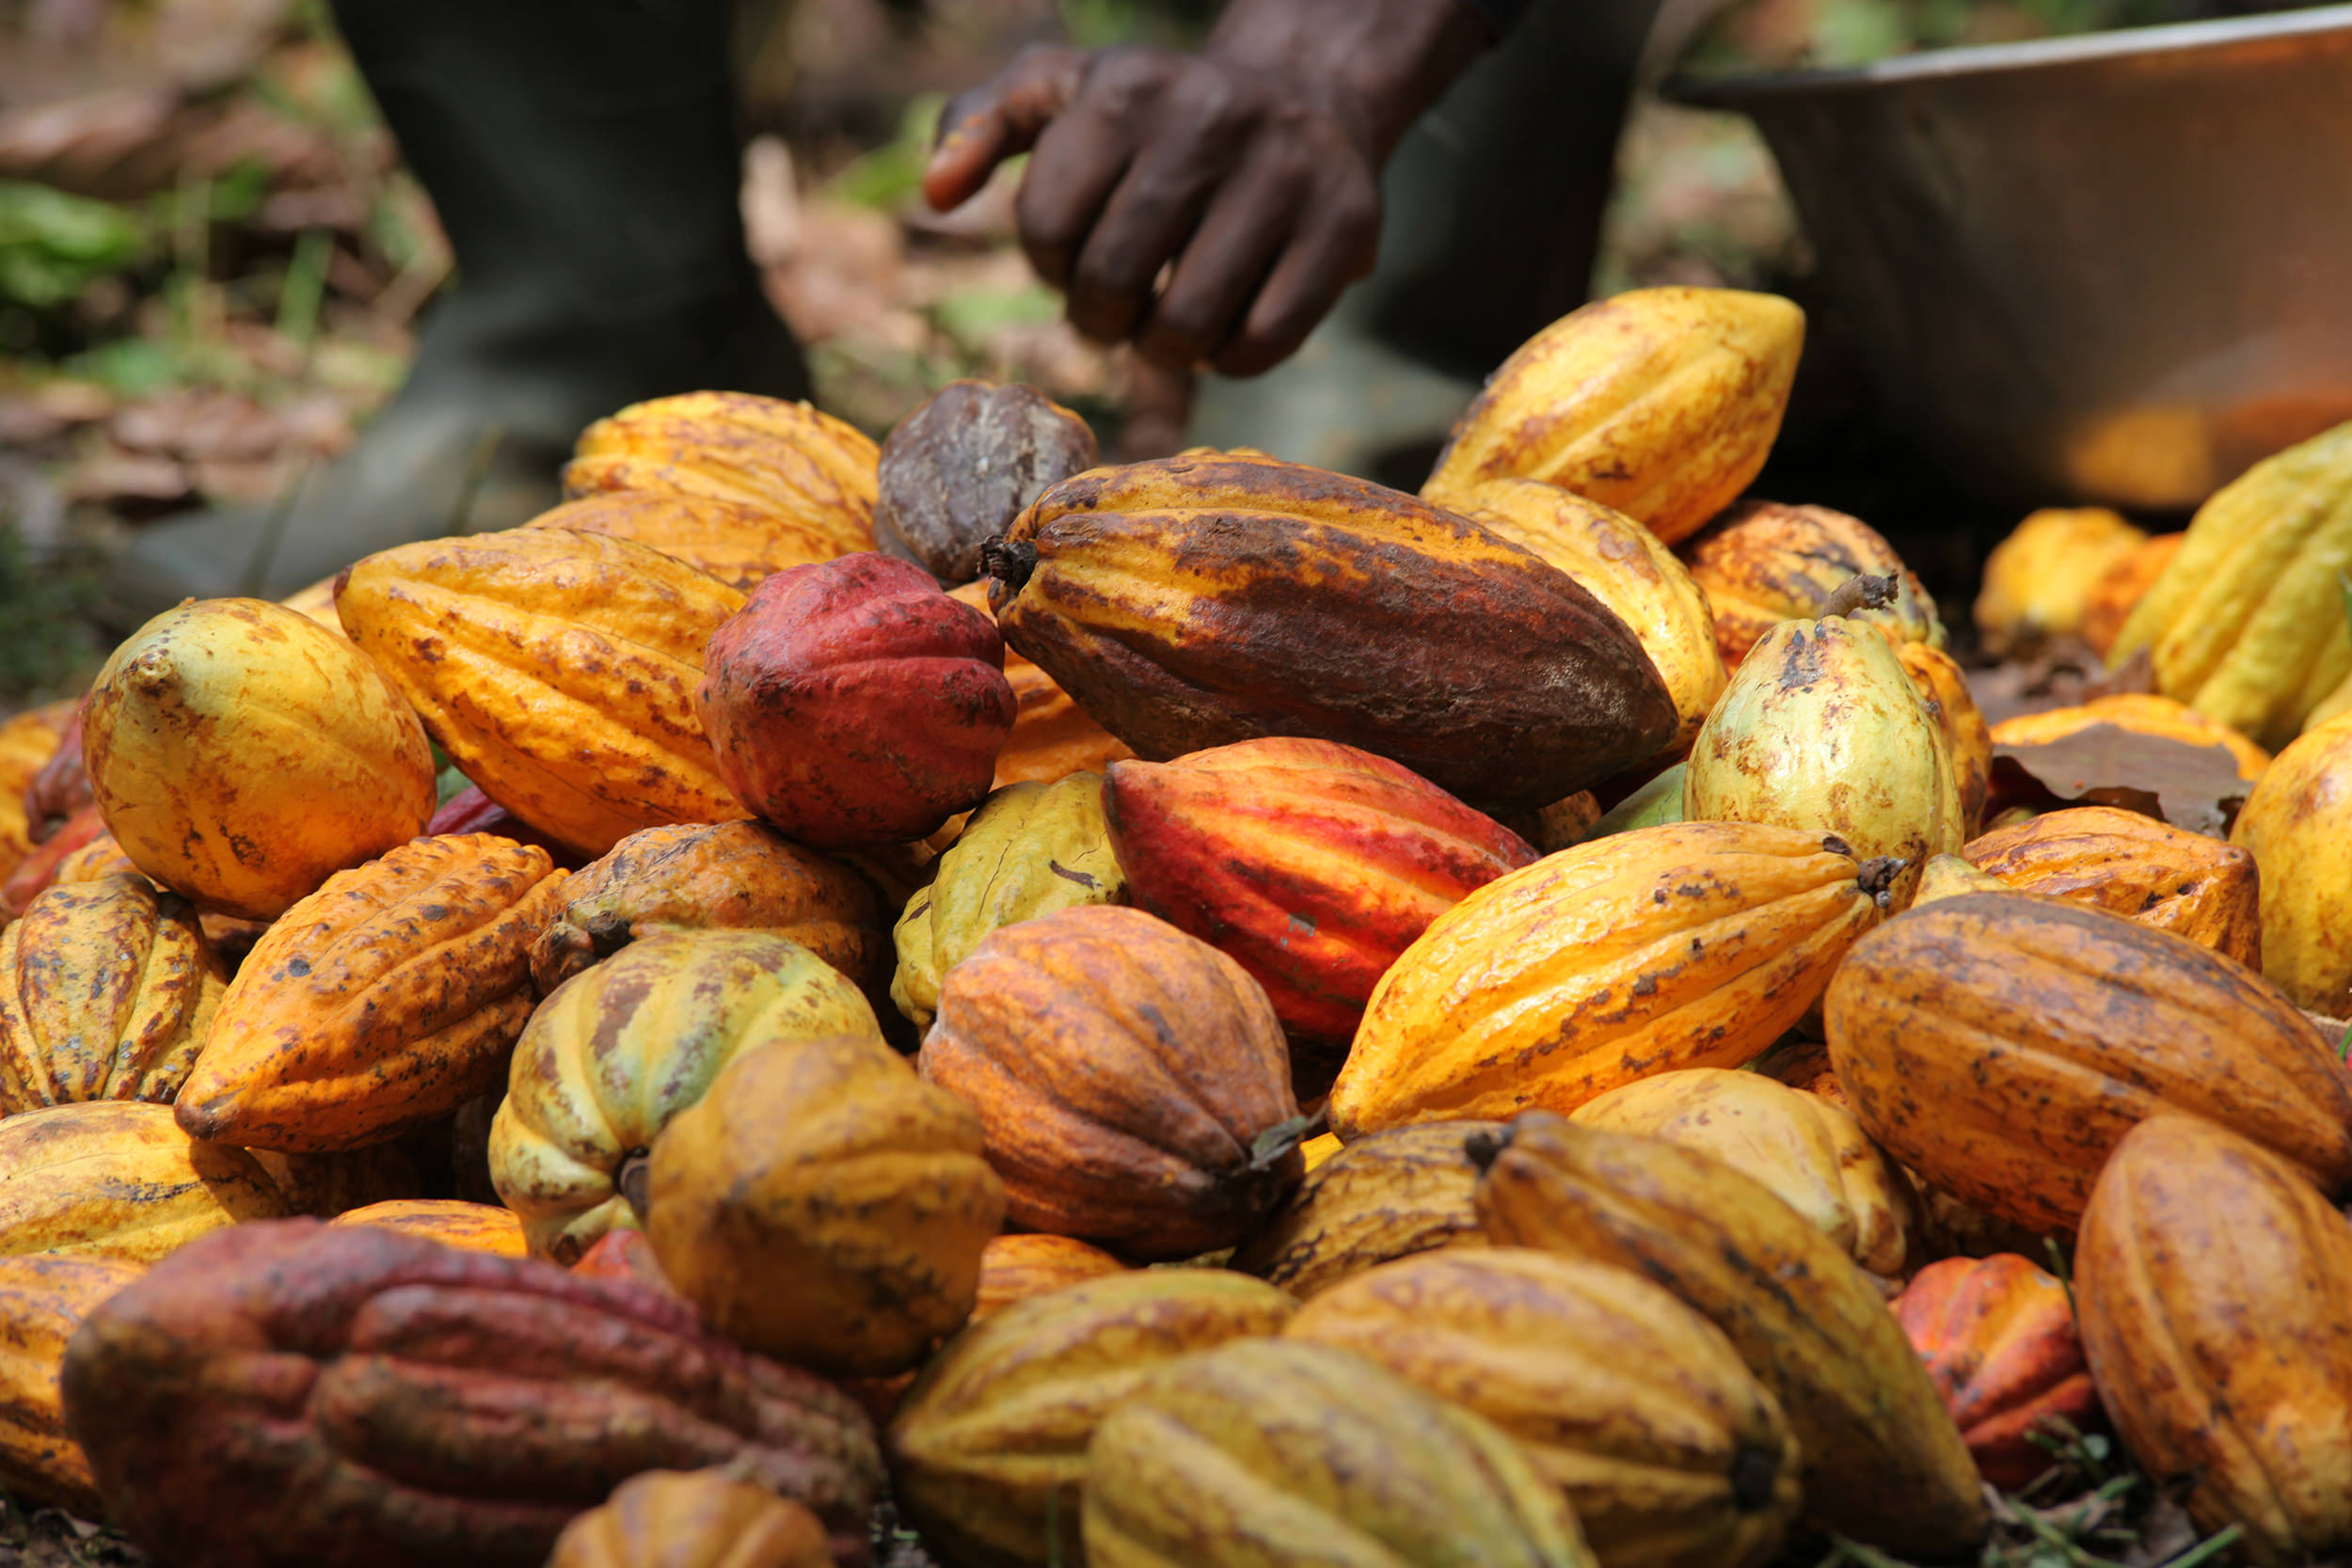  Ghana: Prospects are favorable for the new cocoa season 